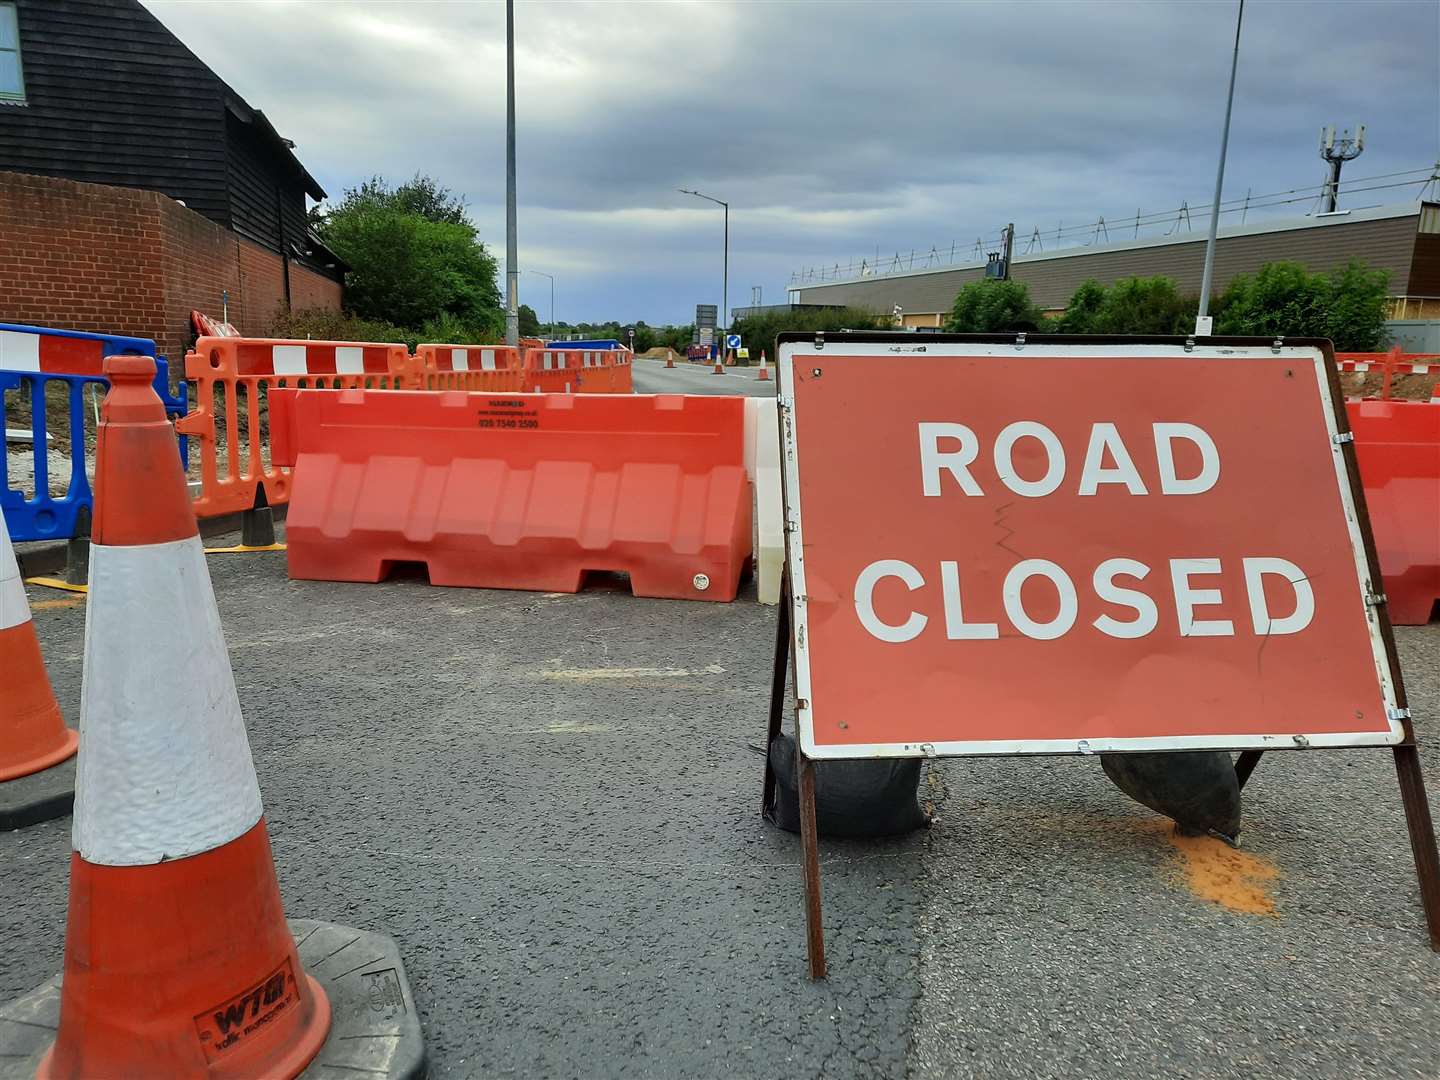 The route was expected to be shut for four days - but has been closed throughout this week